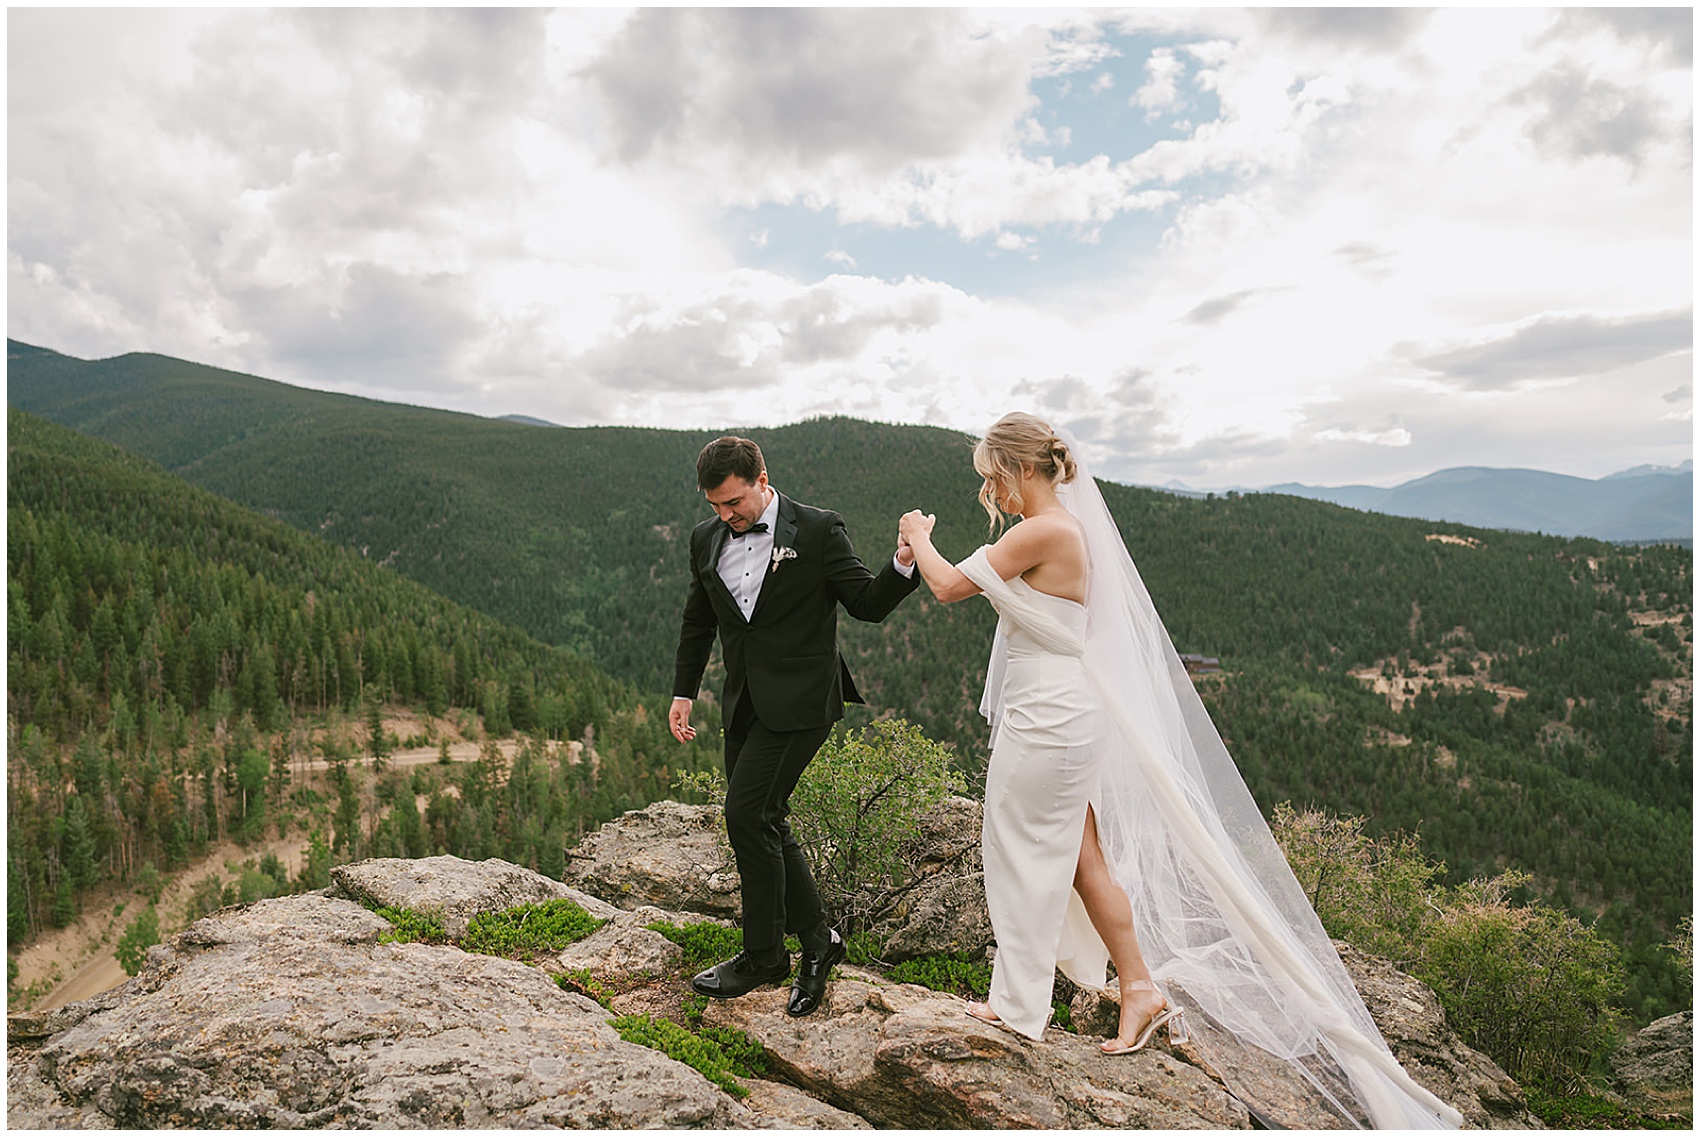 A groom in a black tuxedo leads his bride up a mountain rock overlook